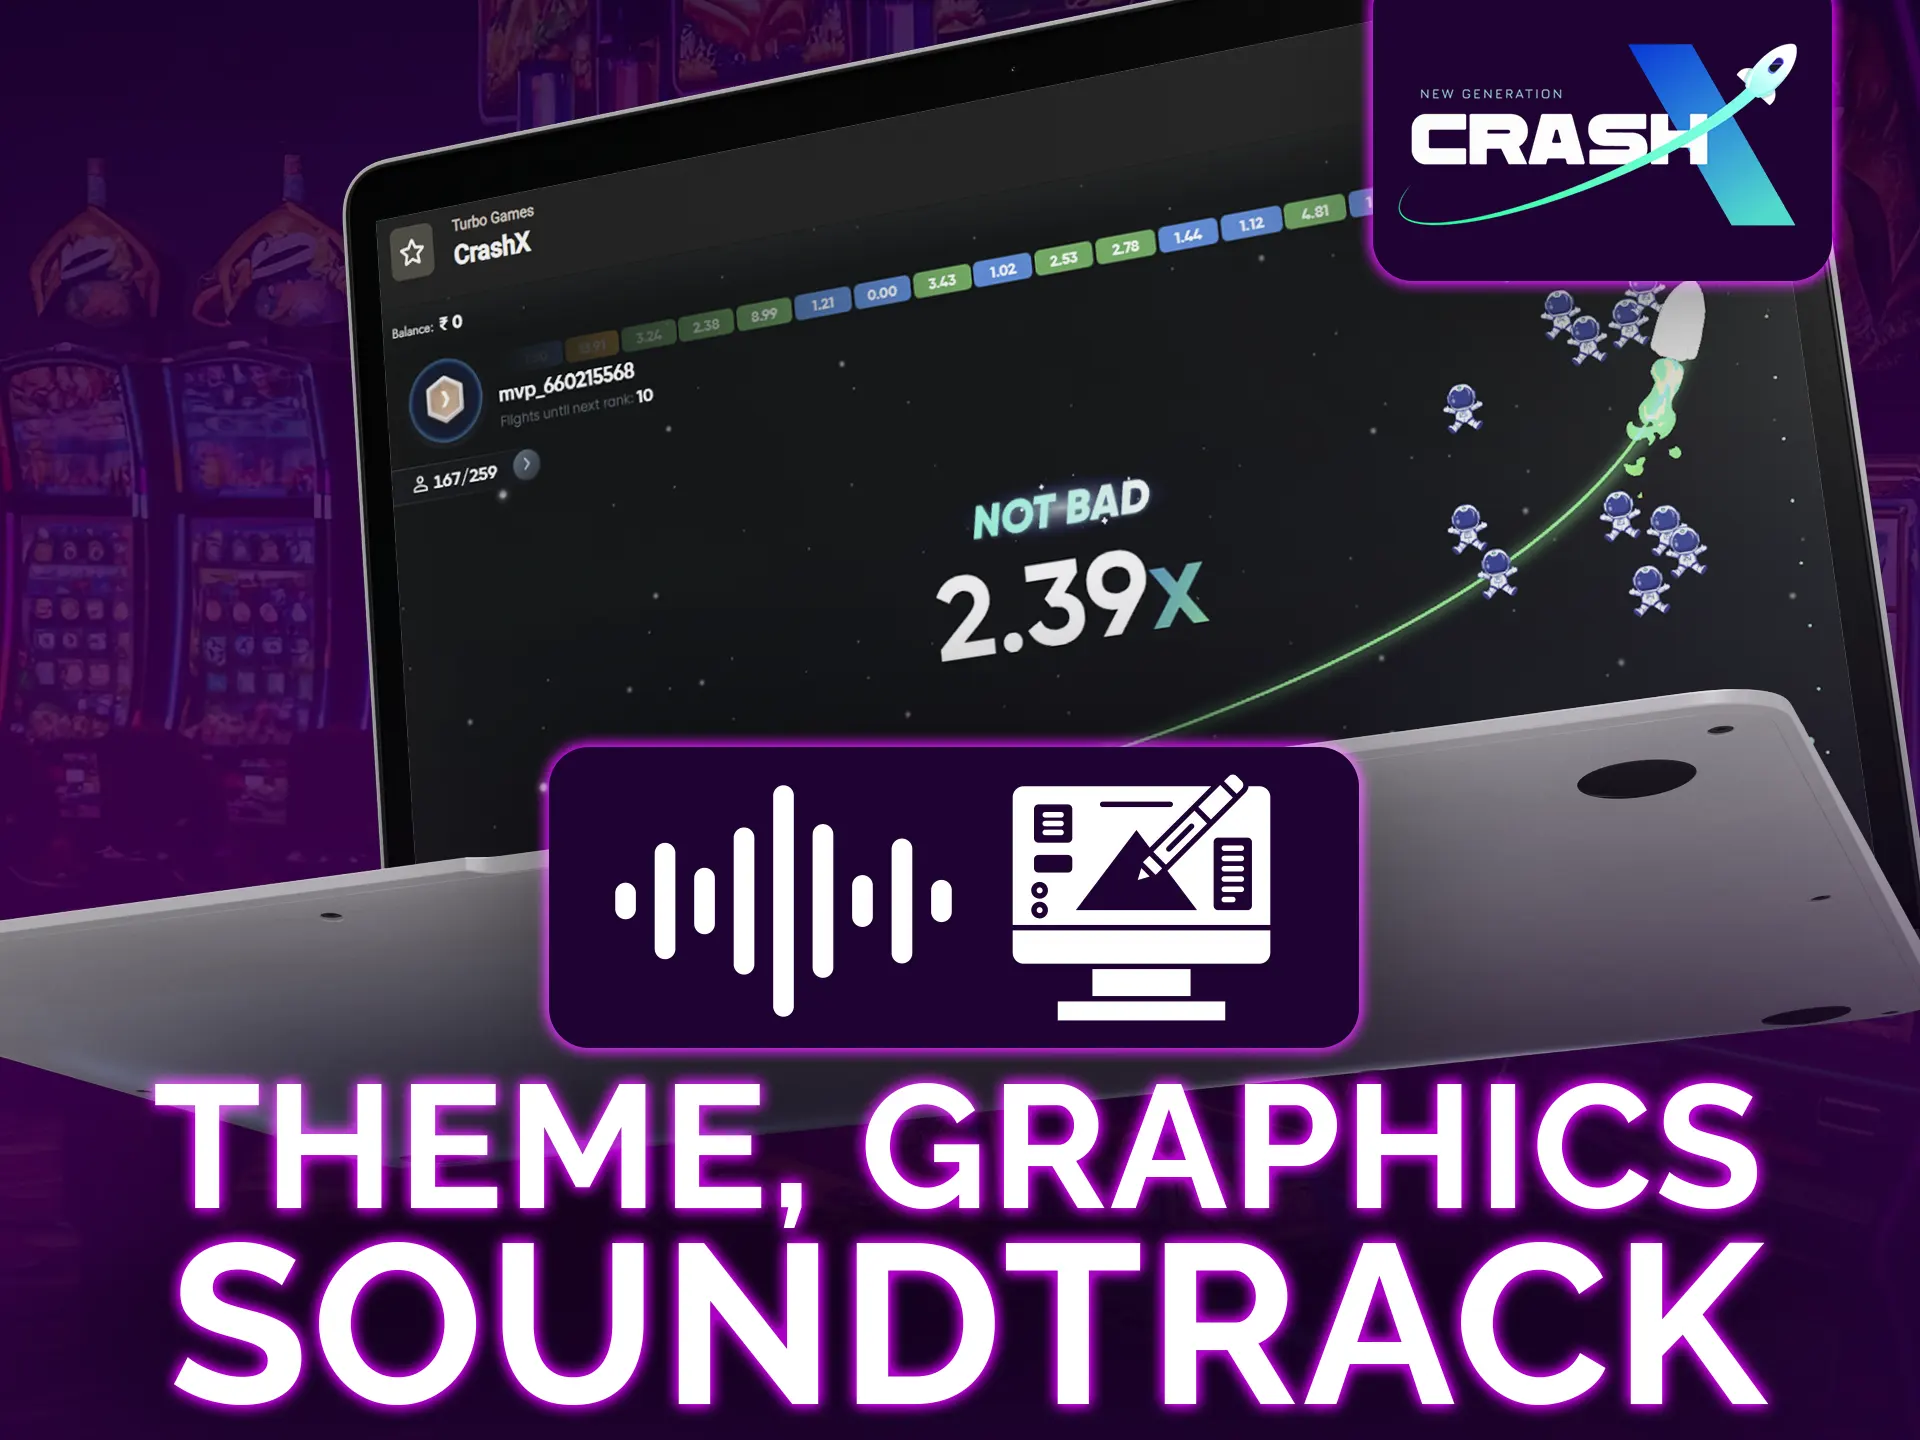 Crash X offers space-themed graphics, sounds, and animations.